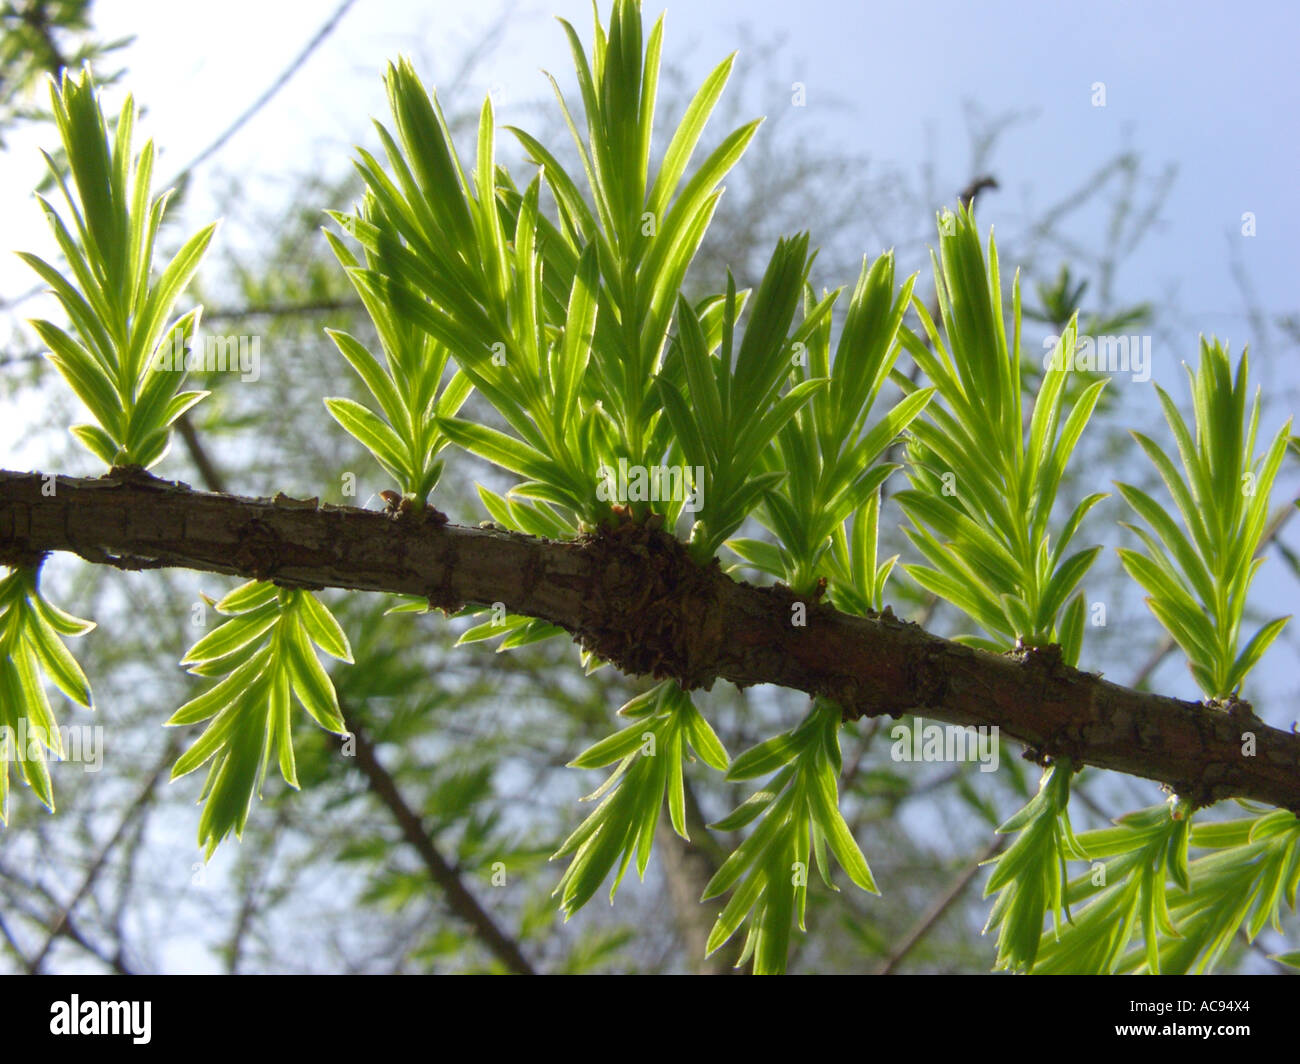 baldcypress (Taxodium distichum), living fossil, leaf shoots in backlight Stock Photo